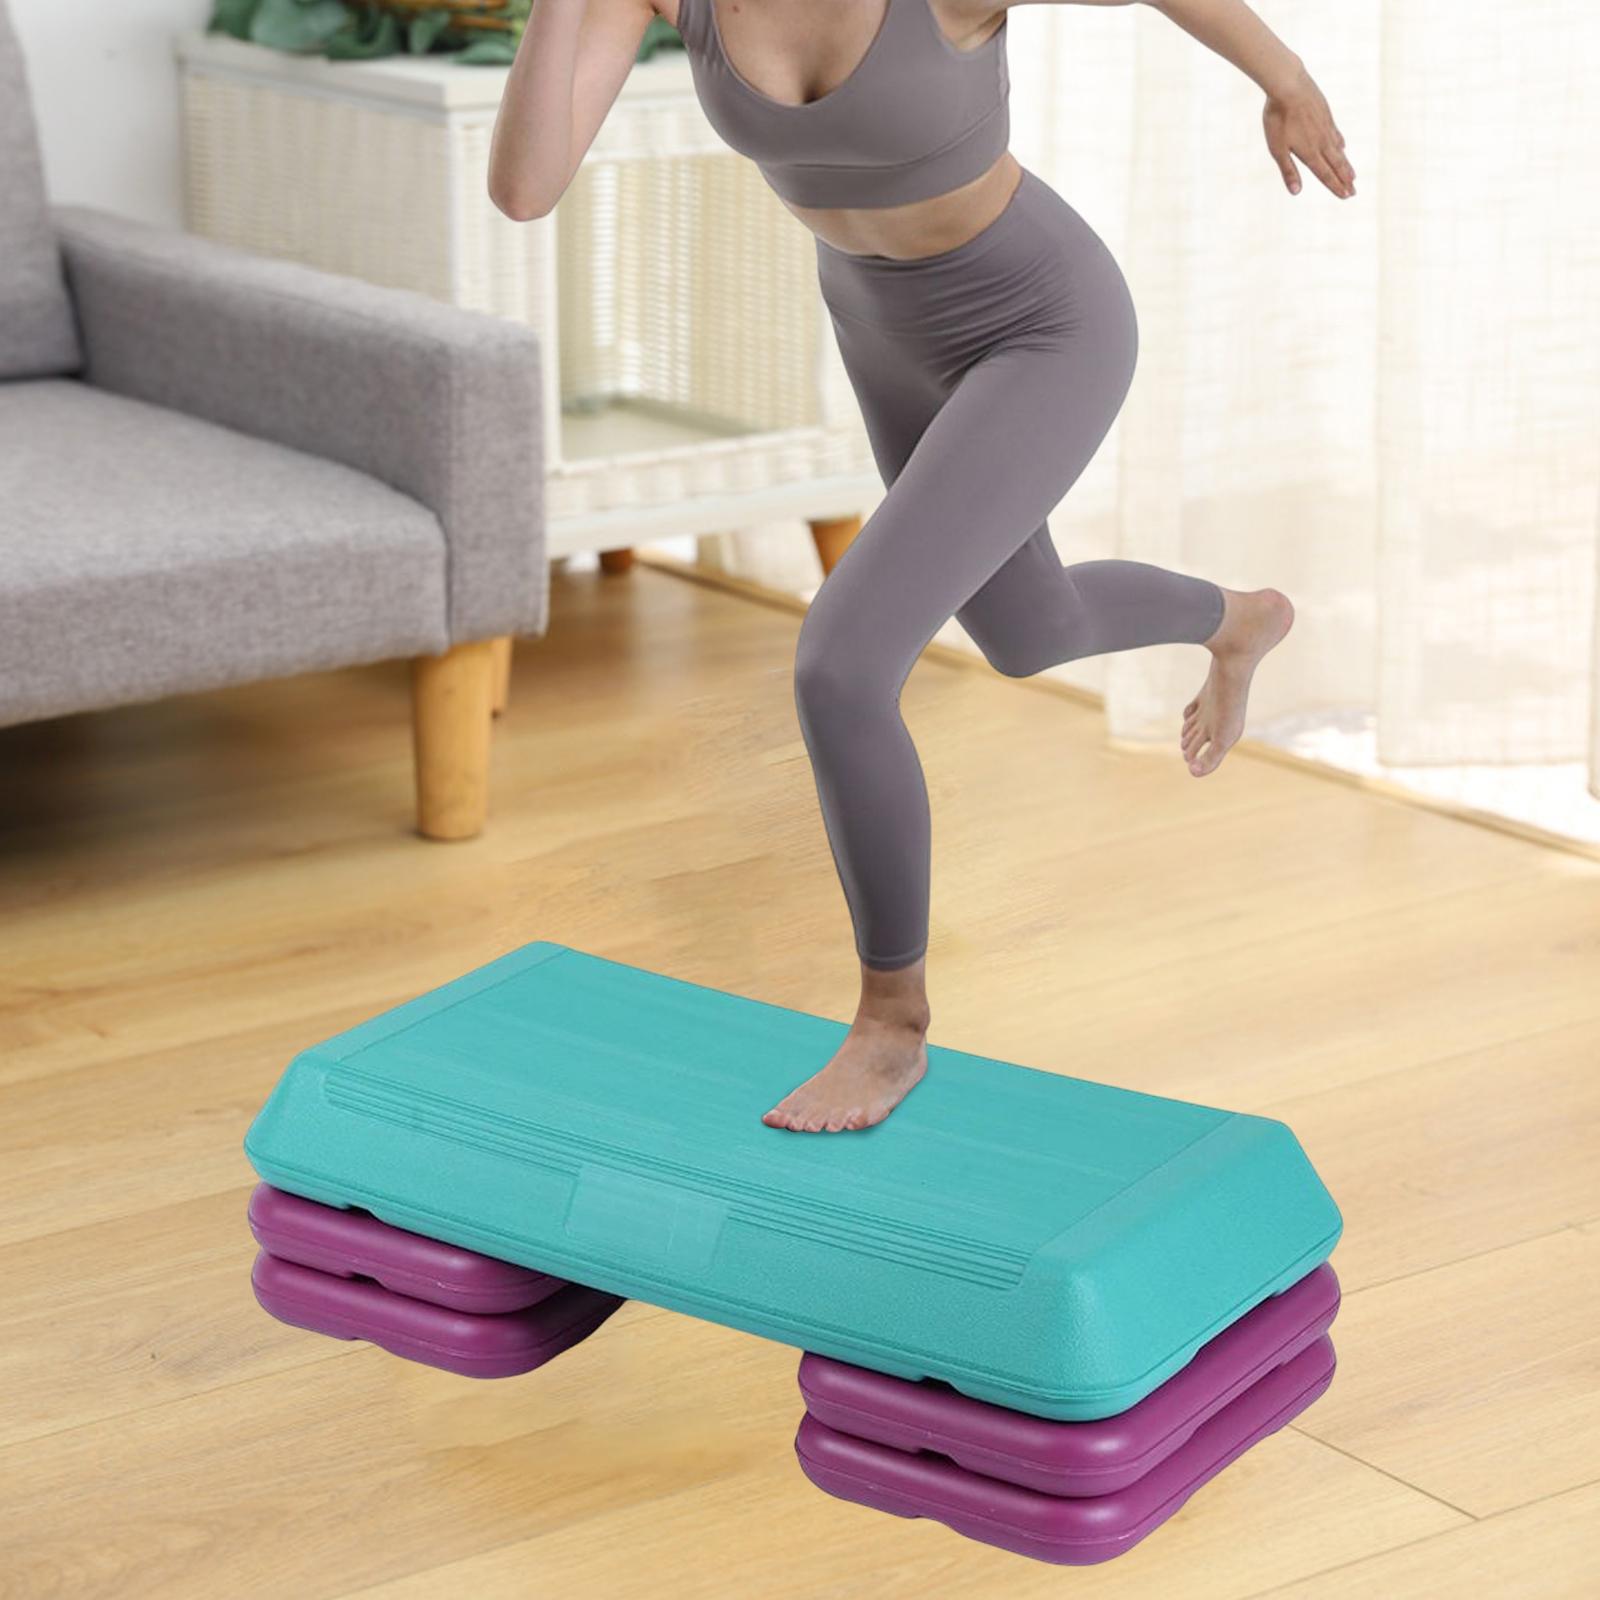 Fitness Pedal Non Slip Board Adjustable Heavy Duty Aerobic Step Trainer for - Yoga Balancing Training - Personal Hour for Yoga and Meditations 